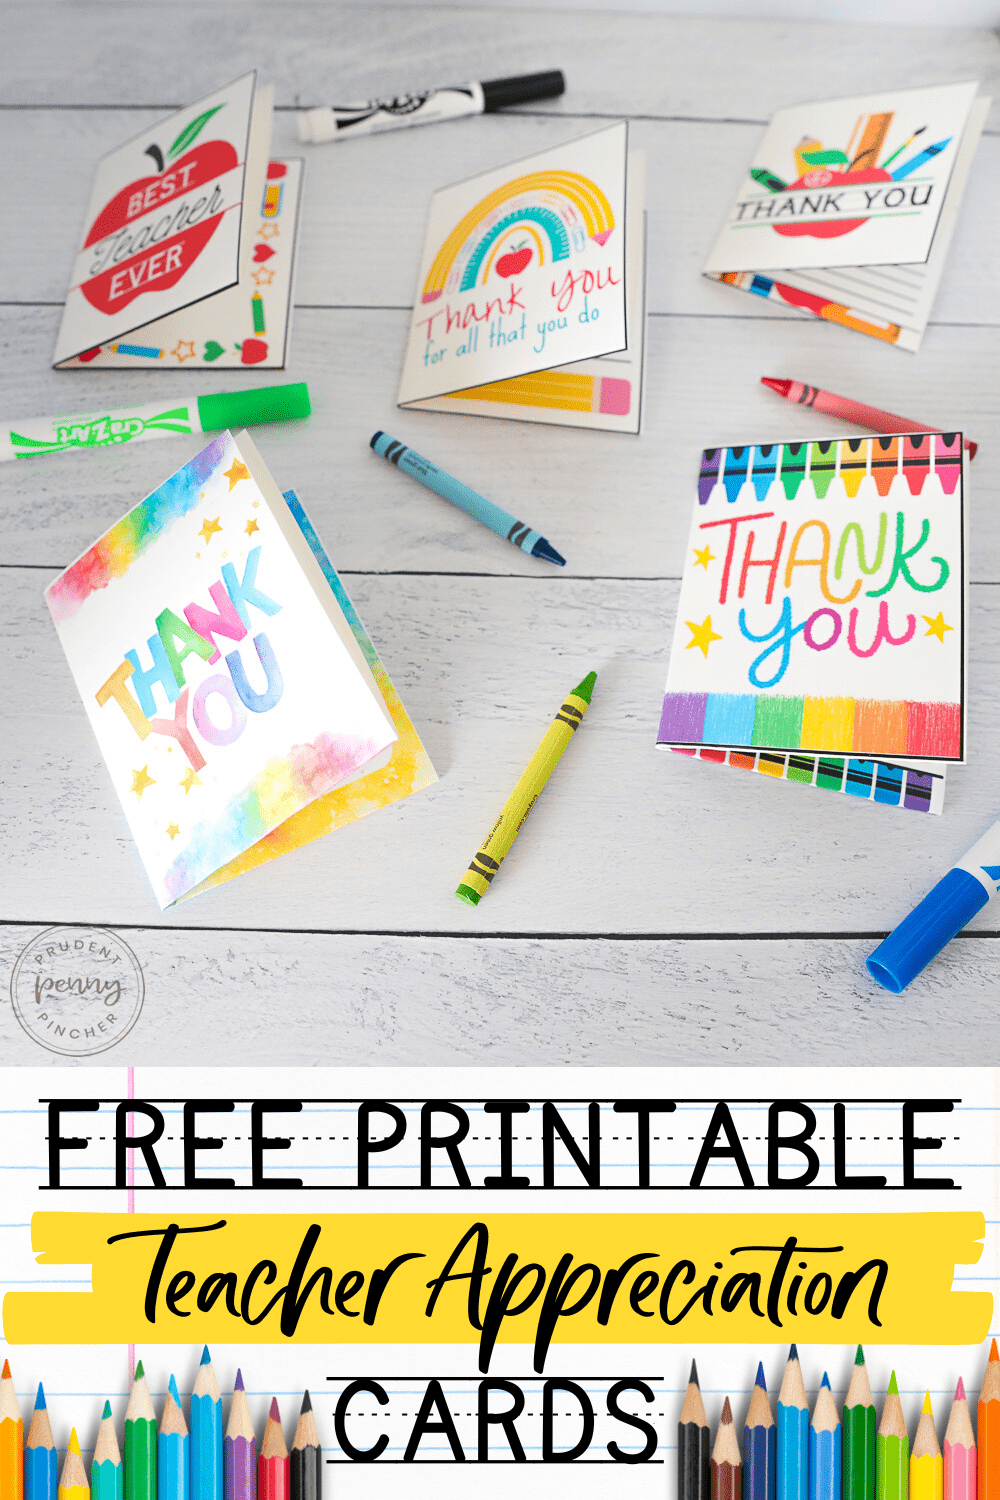 25-awesome-teacher-appreciation-cards-with-free-printables-46-off